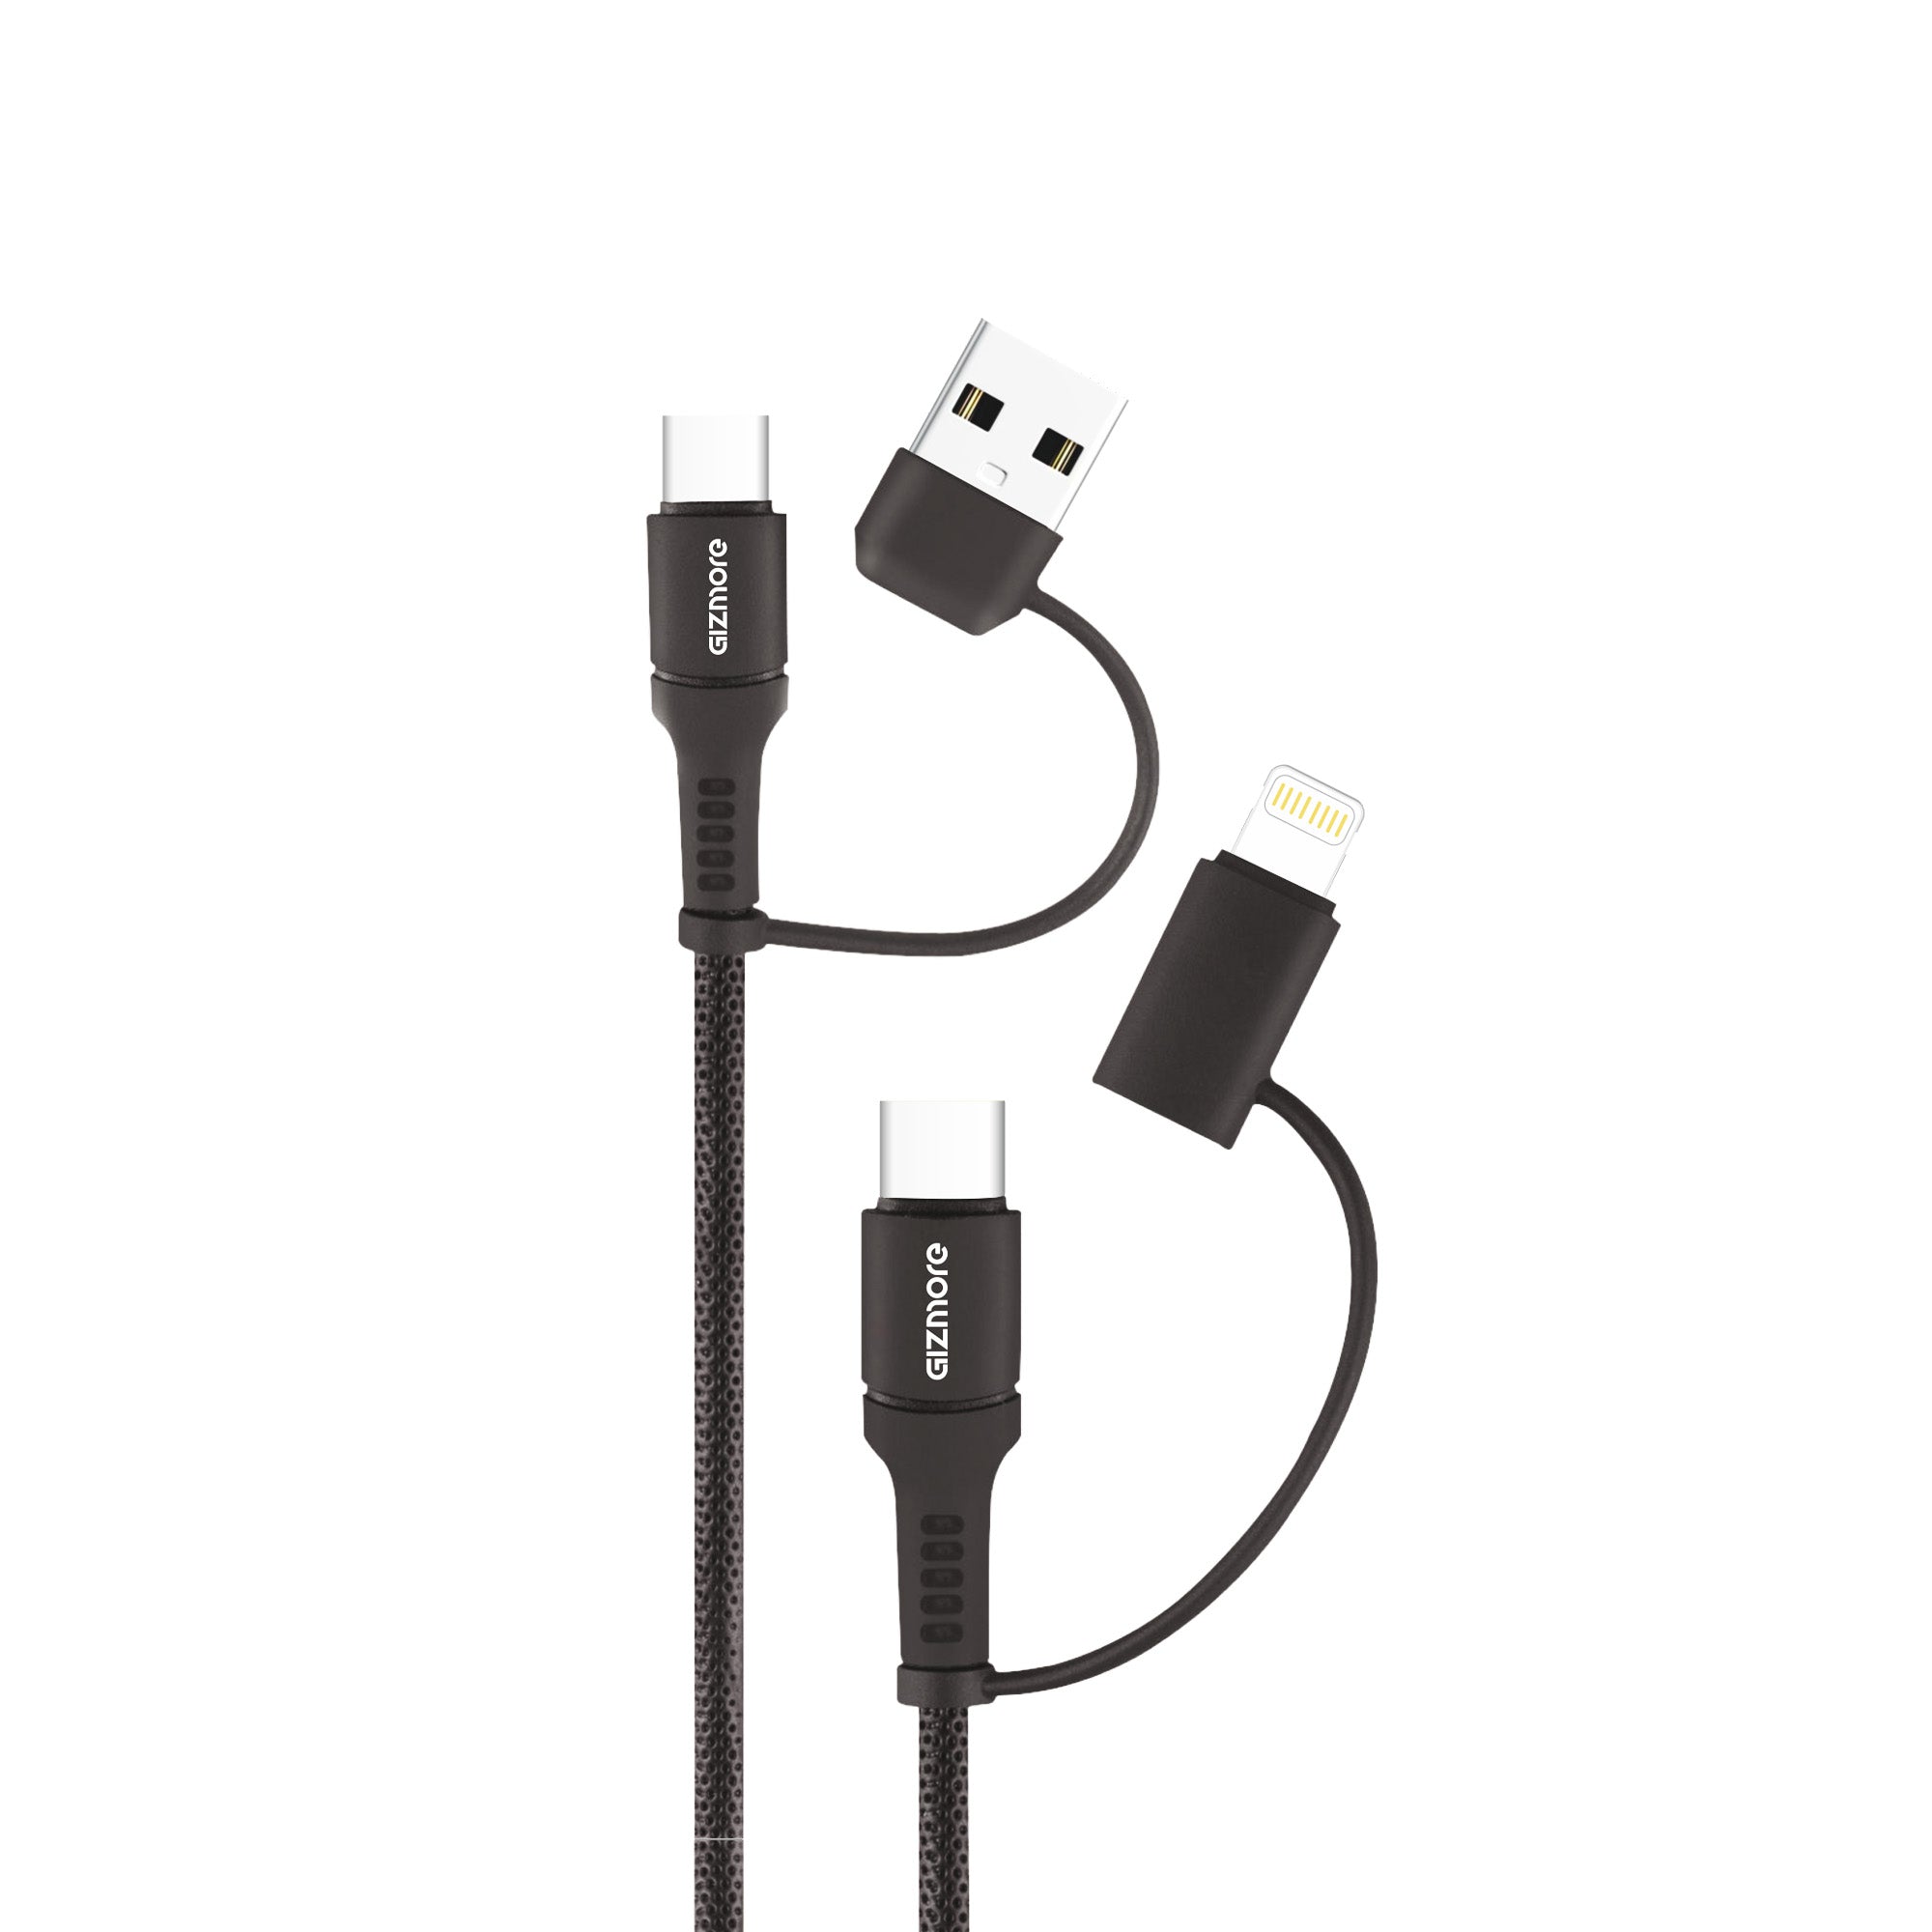 GIZMORE Super-Fast Multi-Connector 4-in-1 Type-C & Lightning Cable with 65W Fast Charging, 480Mbps Data Sync, PD Technology, Compatible with All Type-C and Apple Devices